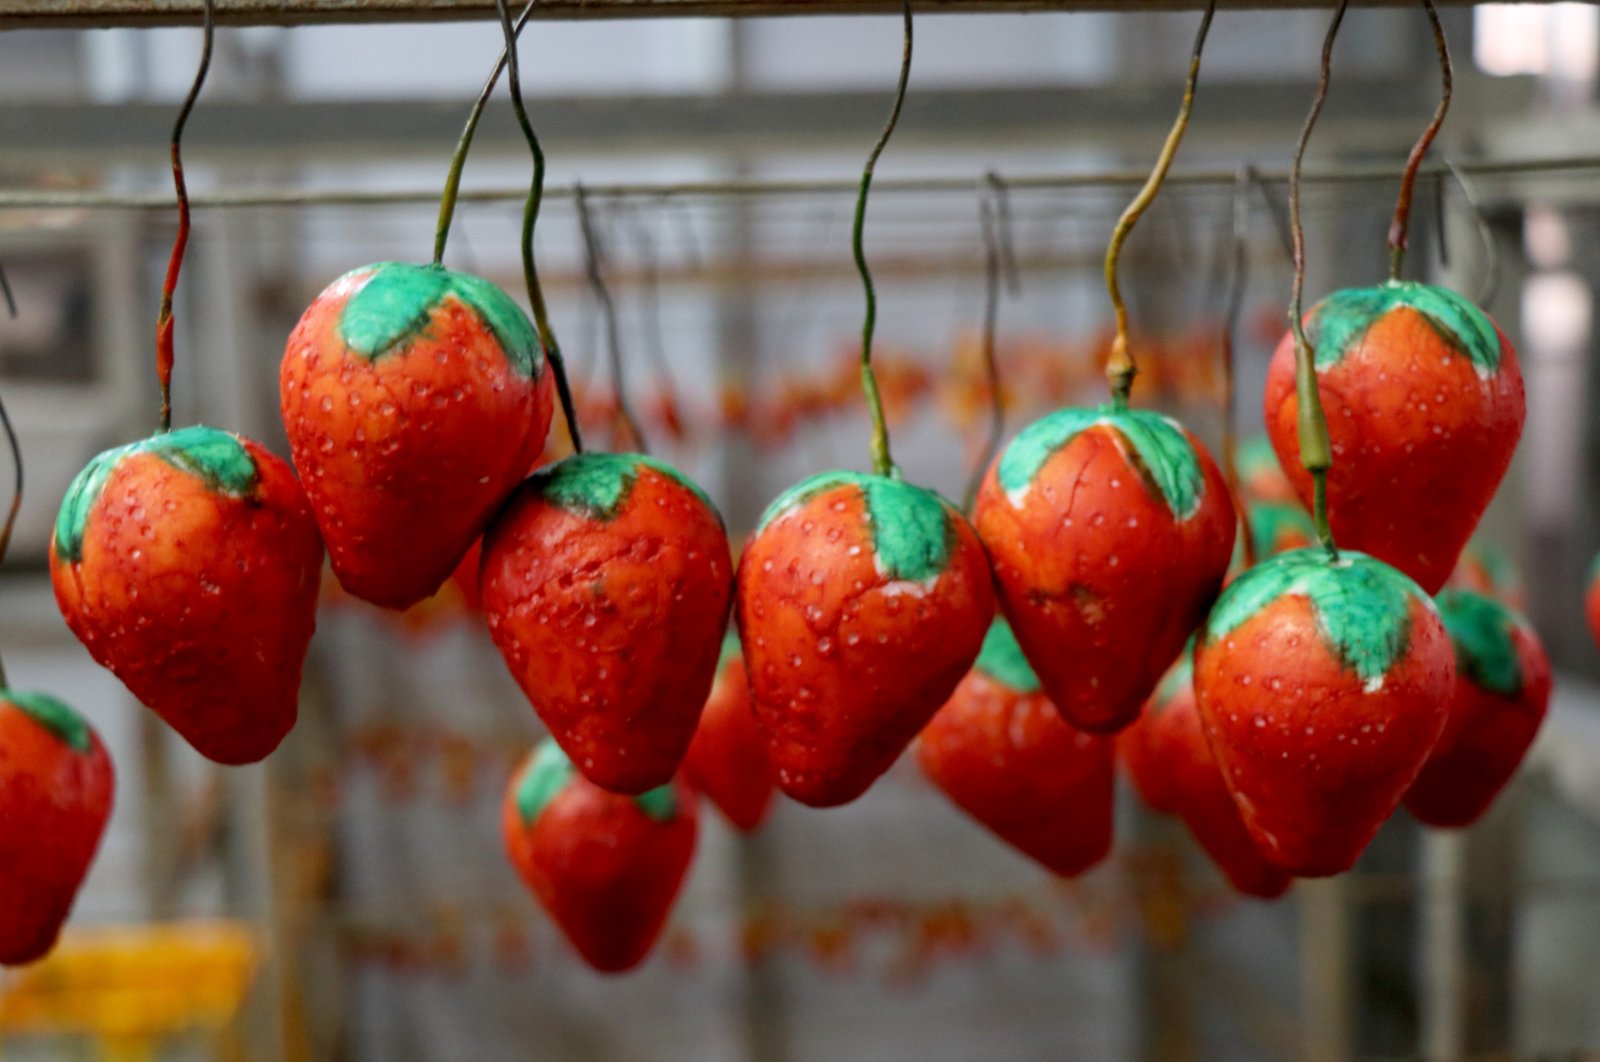 Some fruit-scented soaps shaped like strawberries produced by EDMIS in Edirne, northwestern Turkey, Jan. 6, 2021. (DHA Photo)